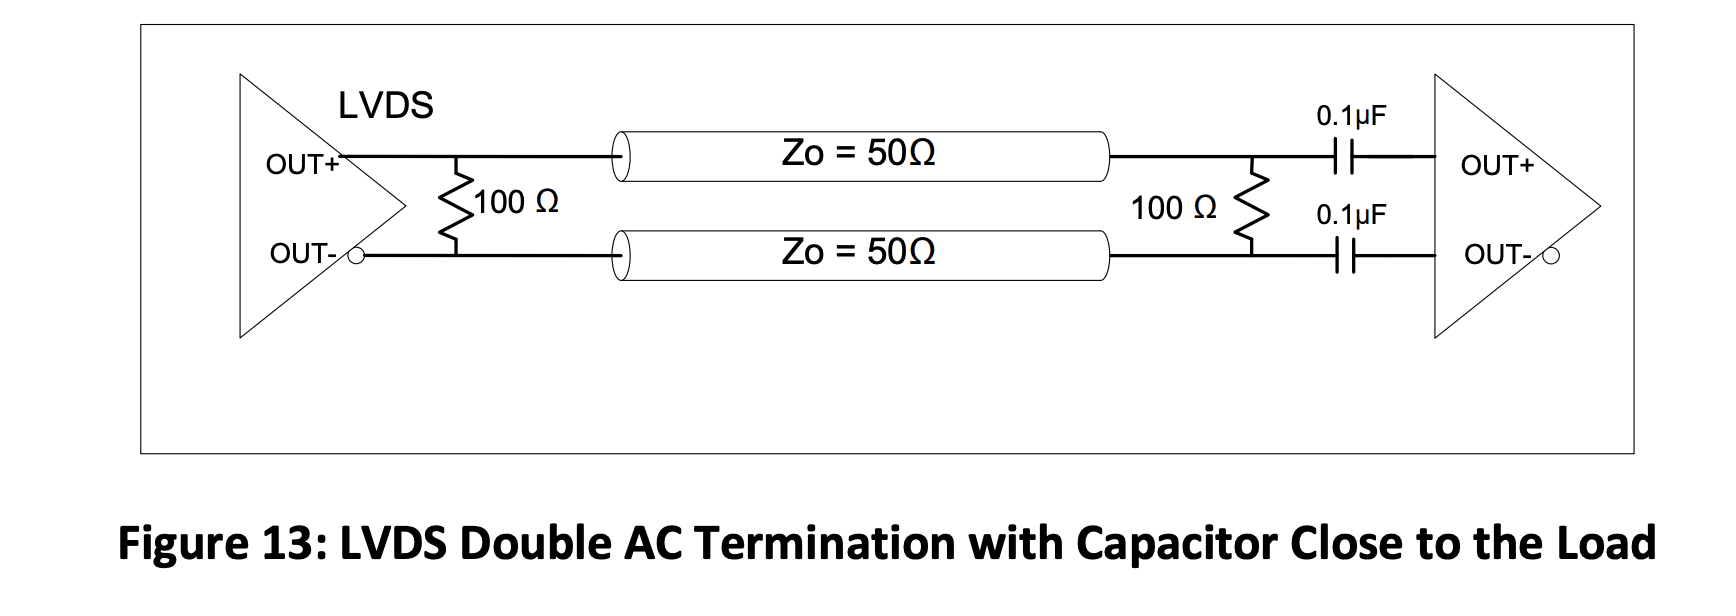 Figure 13 LVDS Double AC Termination with Capacitor Close to the Load